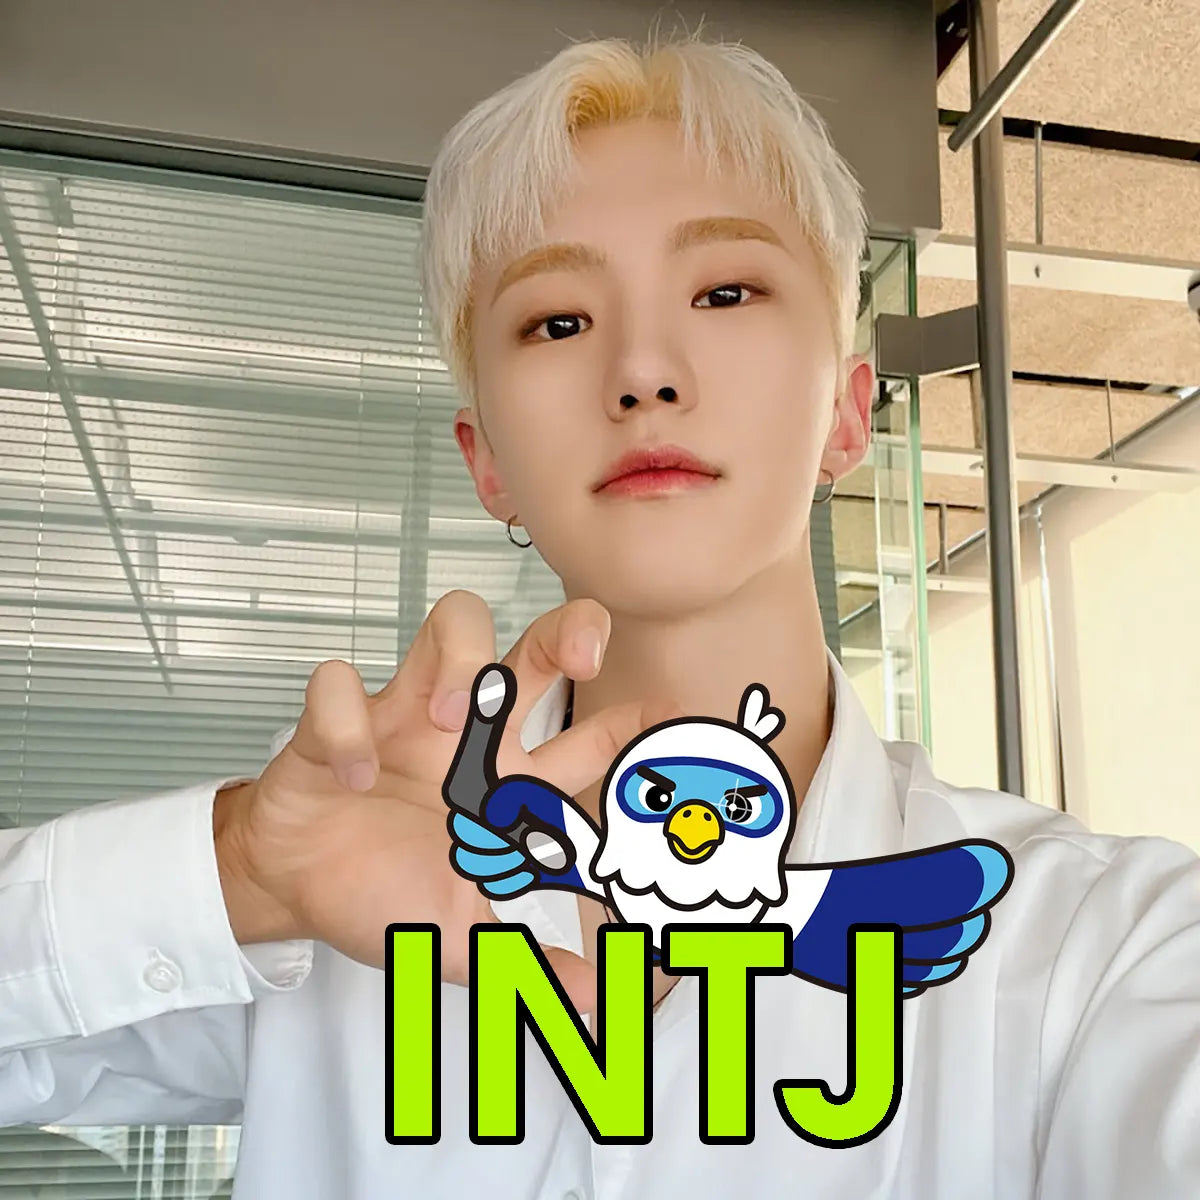 HoShi SEVENTEEN MBTI Personality Test INFP INTJ Personality Type